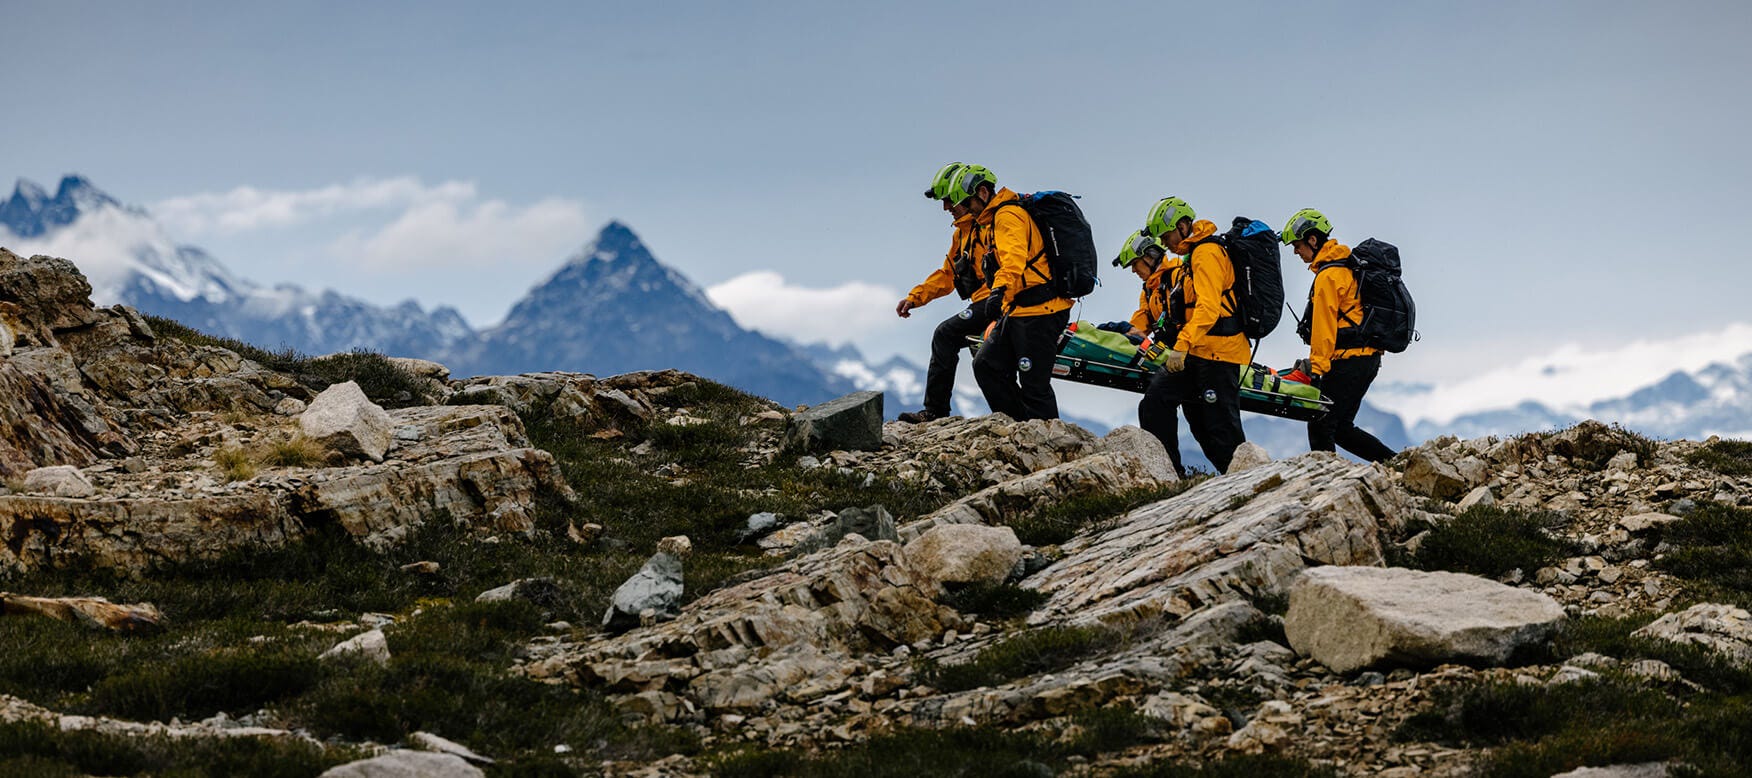 Squamish Search and Rescue